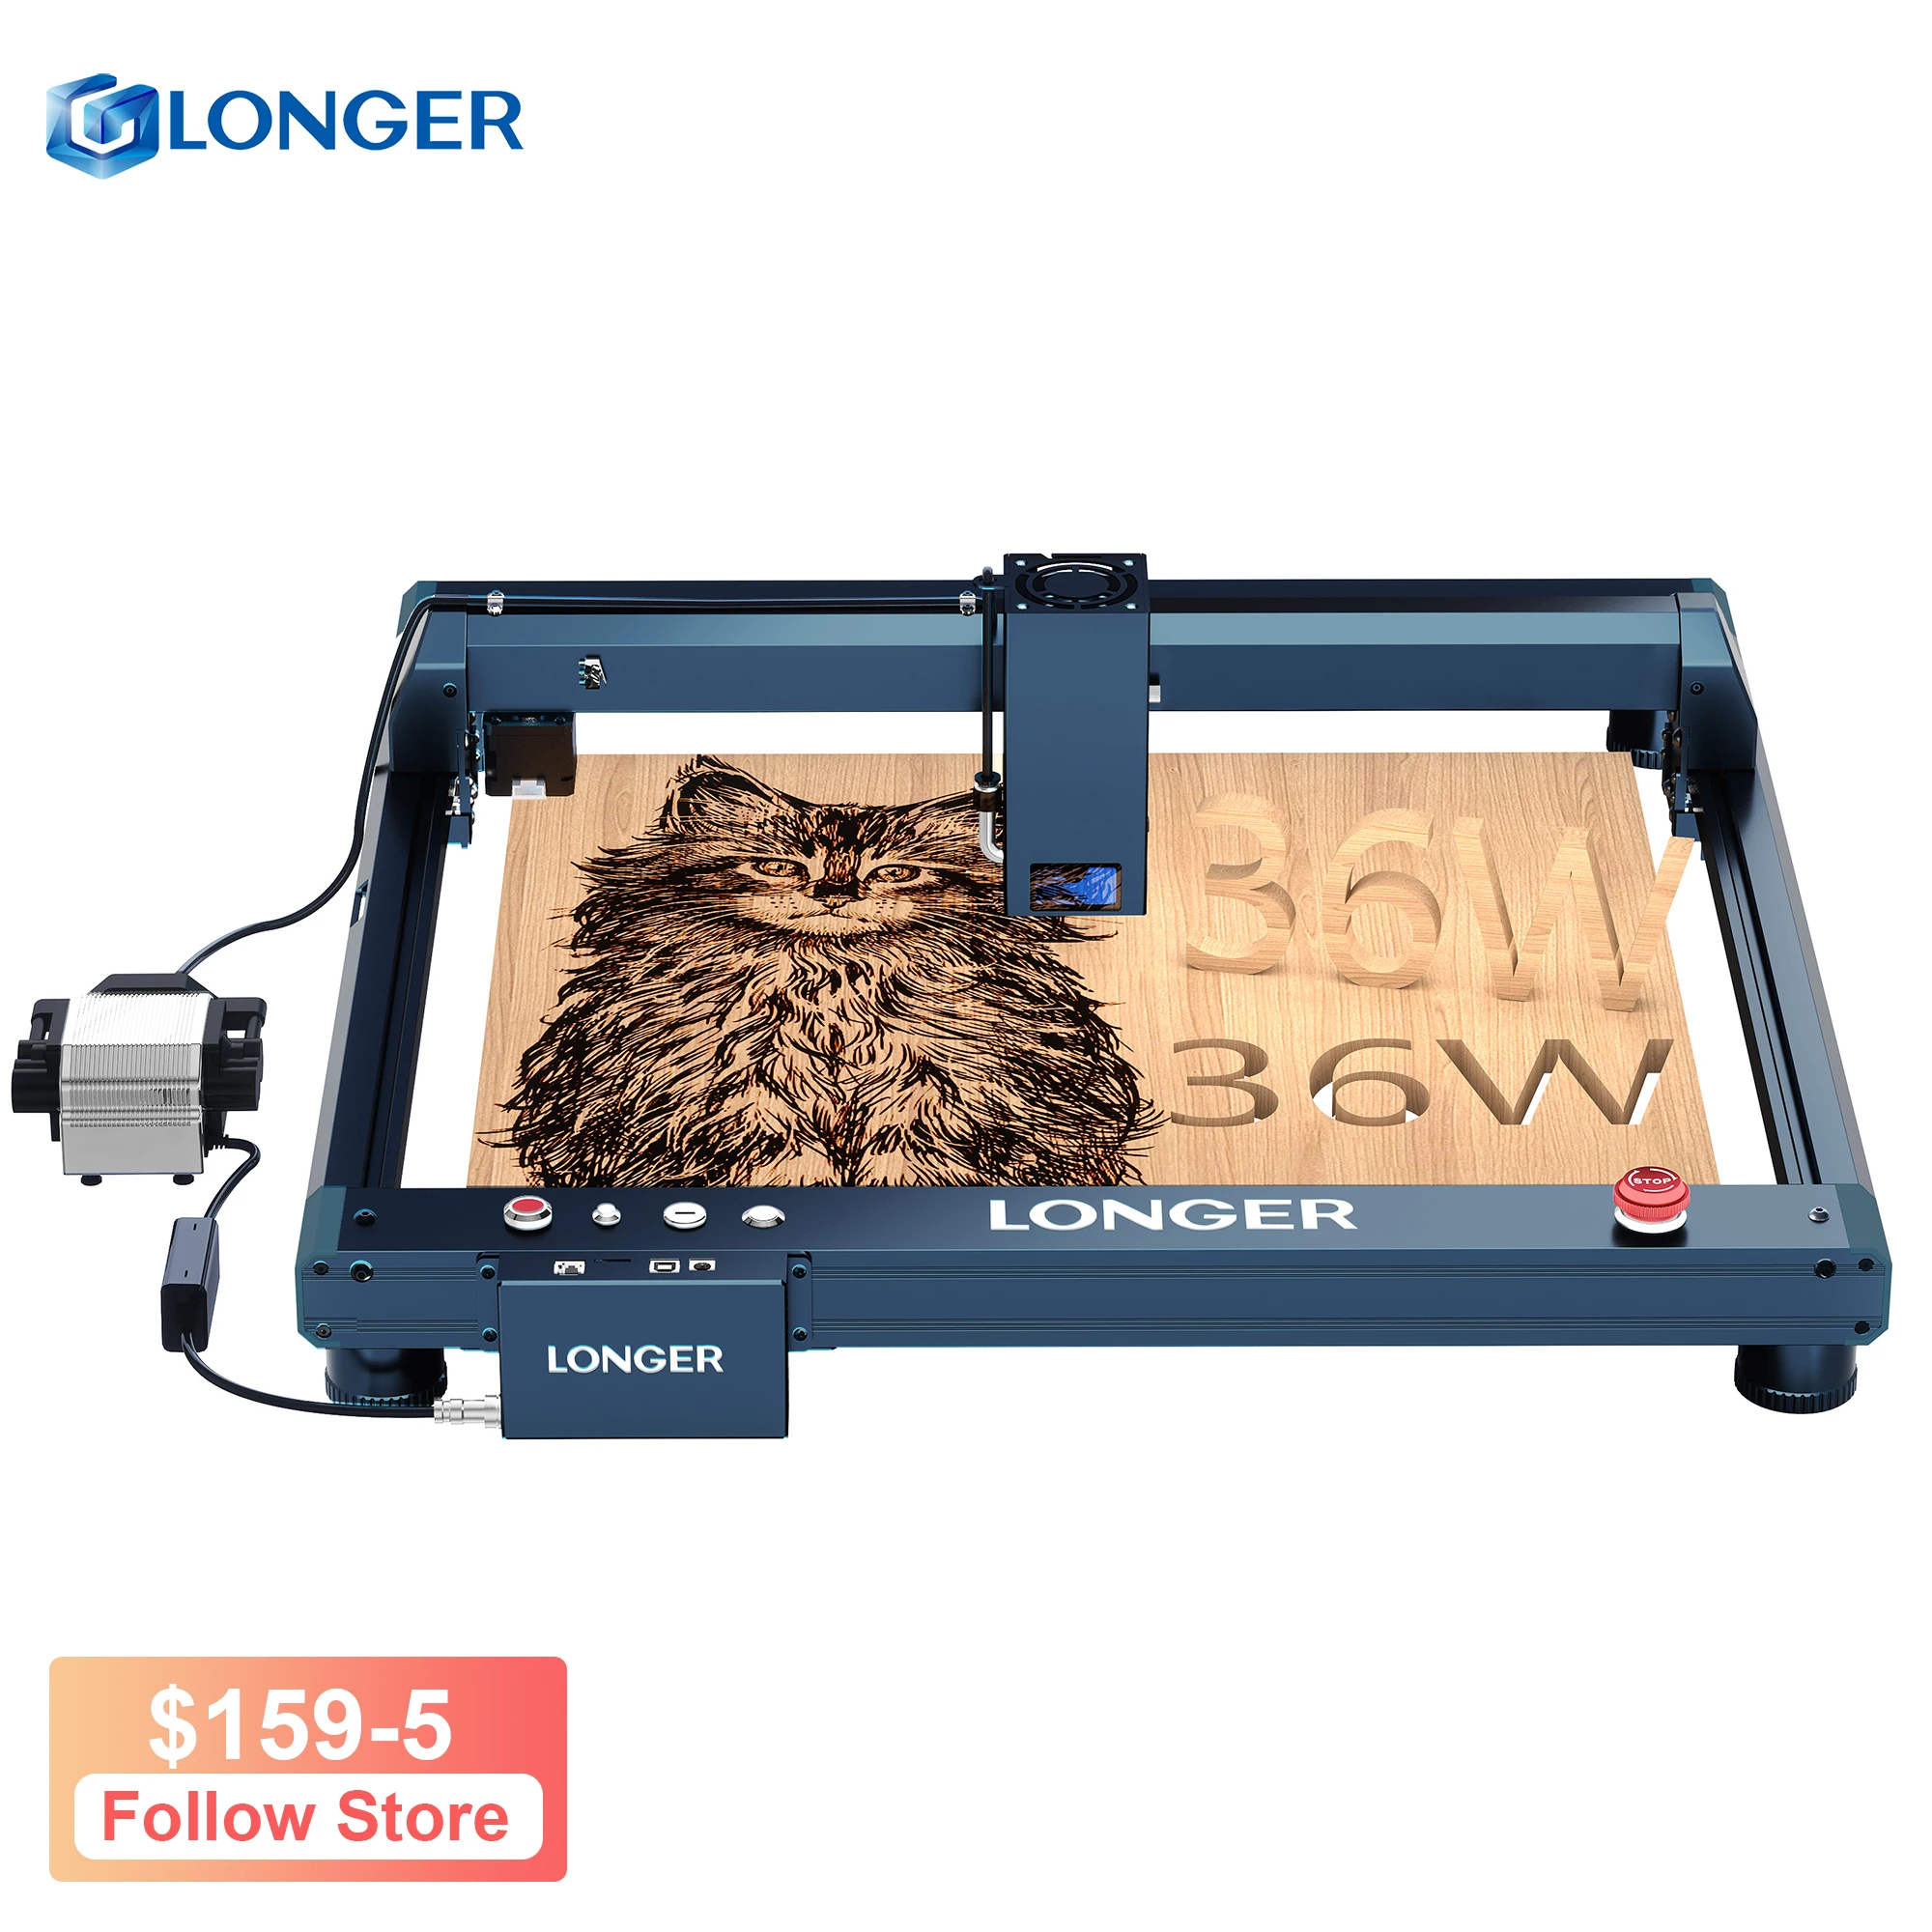 

LONGER B1 30W Auto Air-assist Laser Engraver Wifi Control Cutting Machine Quick Focus 450x440mm With Flame Detection System